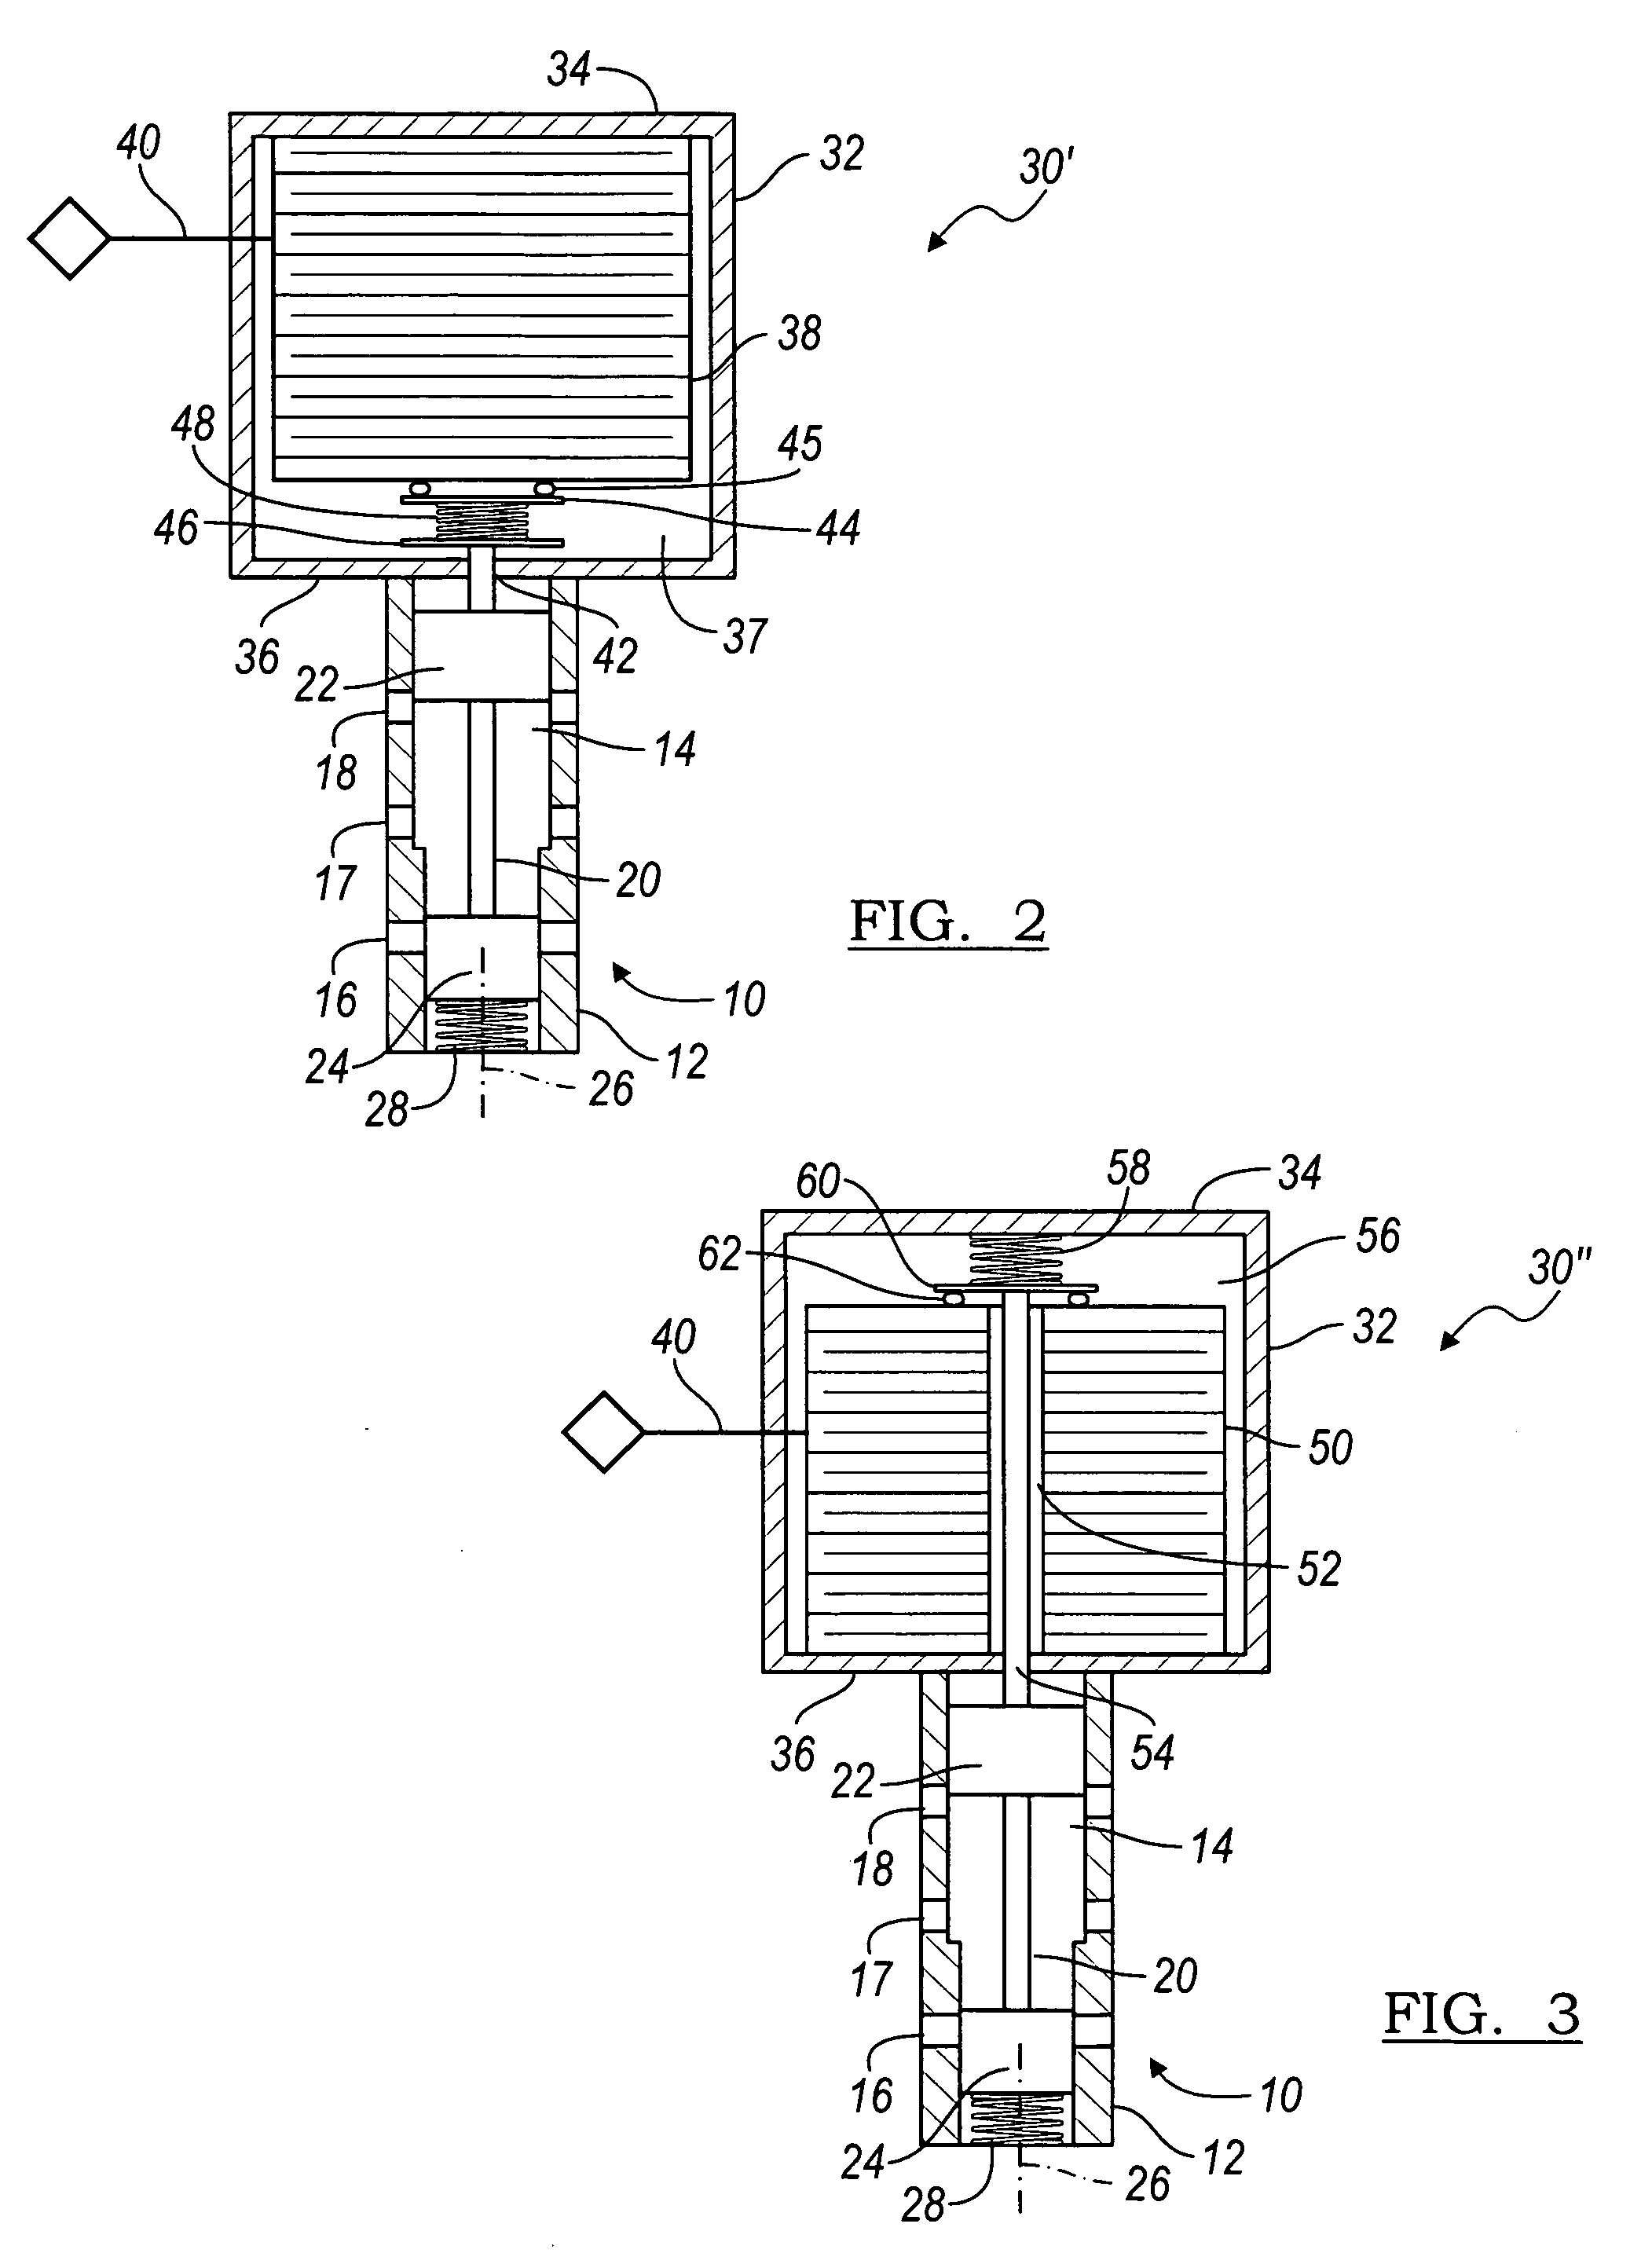 Hydraulic valve actuated by piezoelectric effect